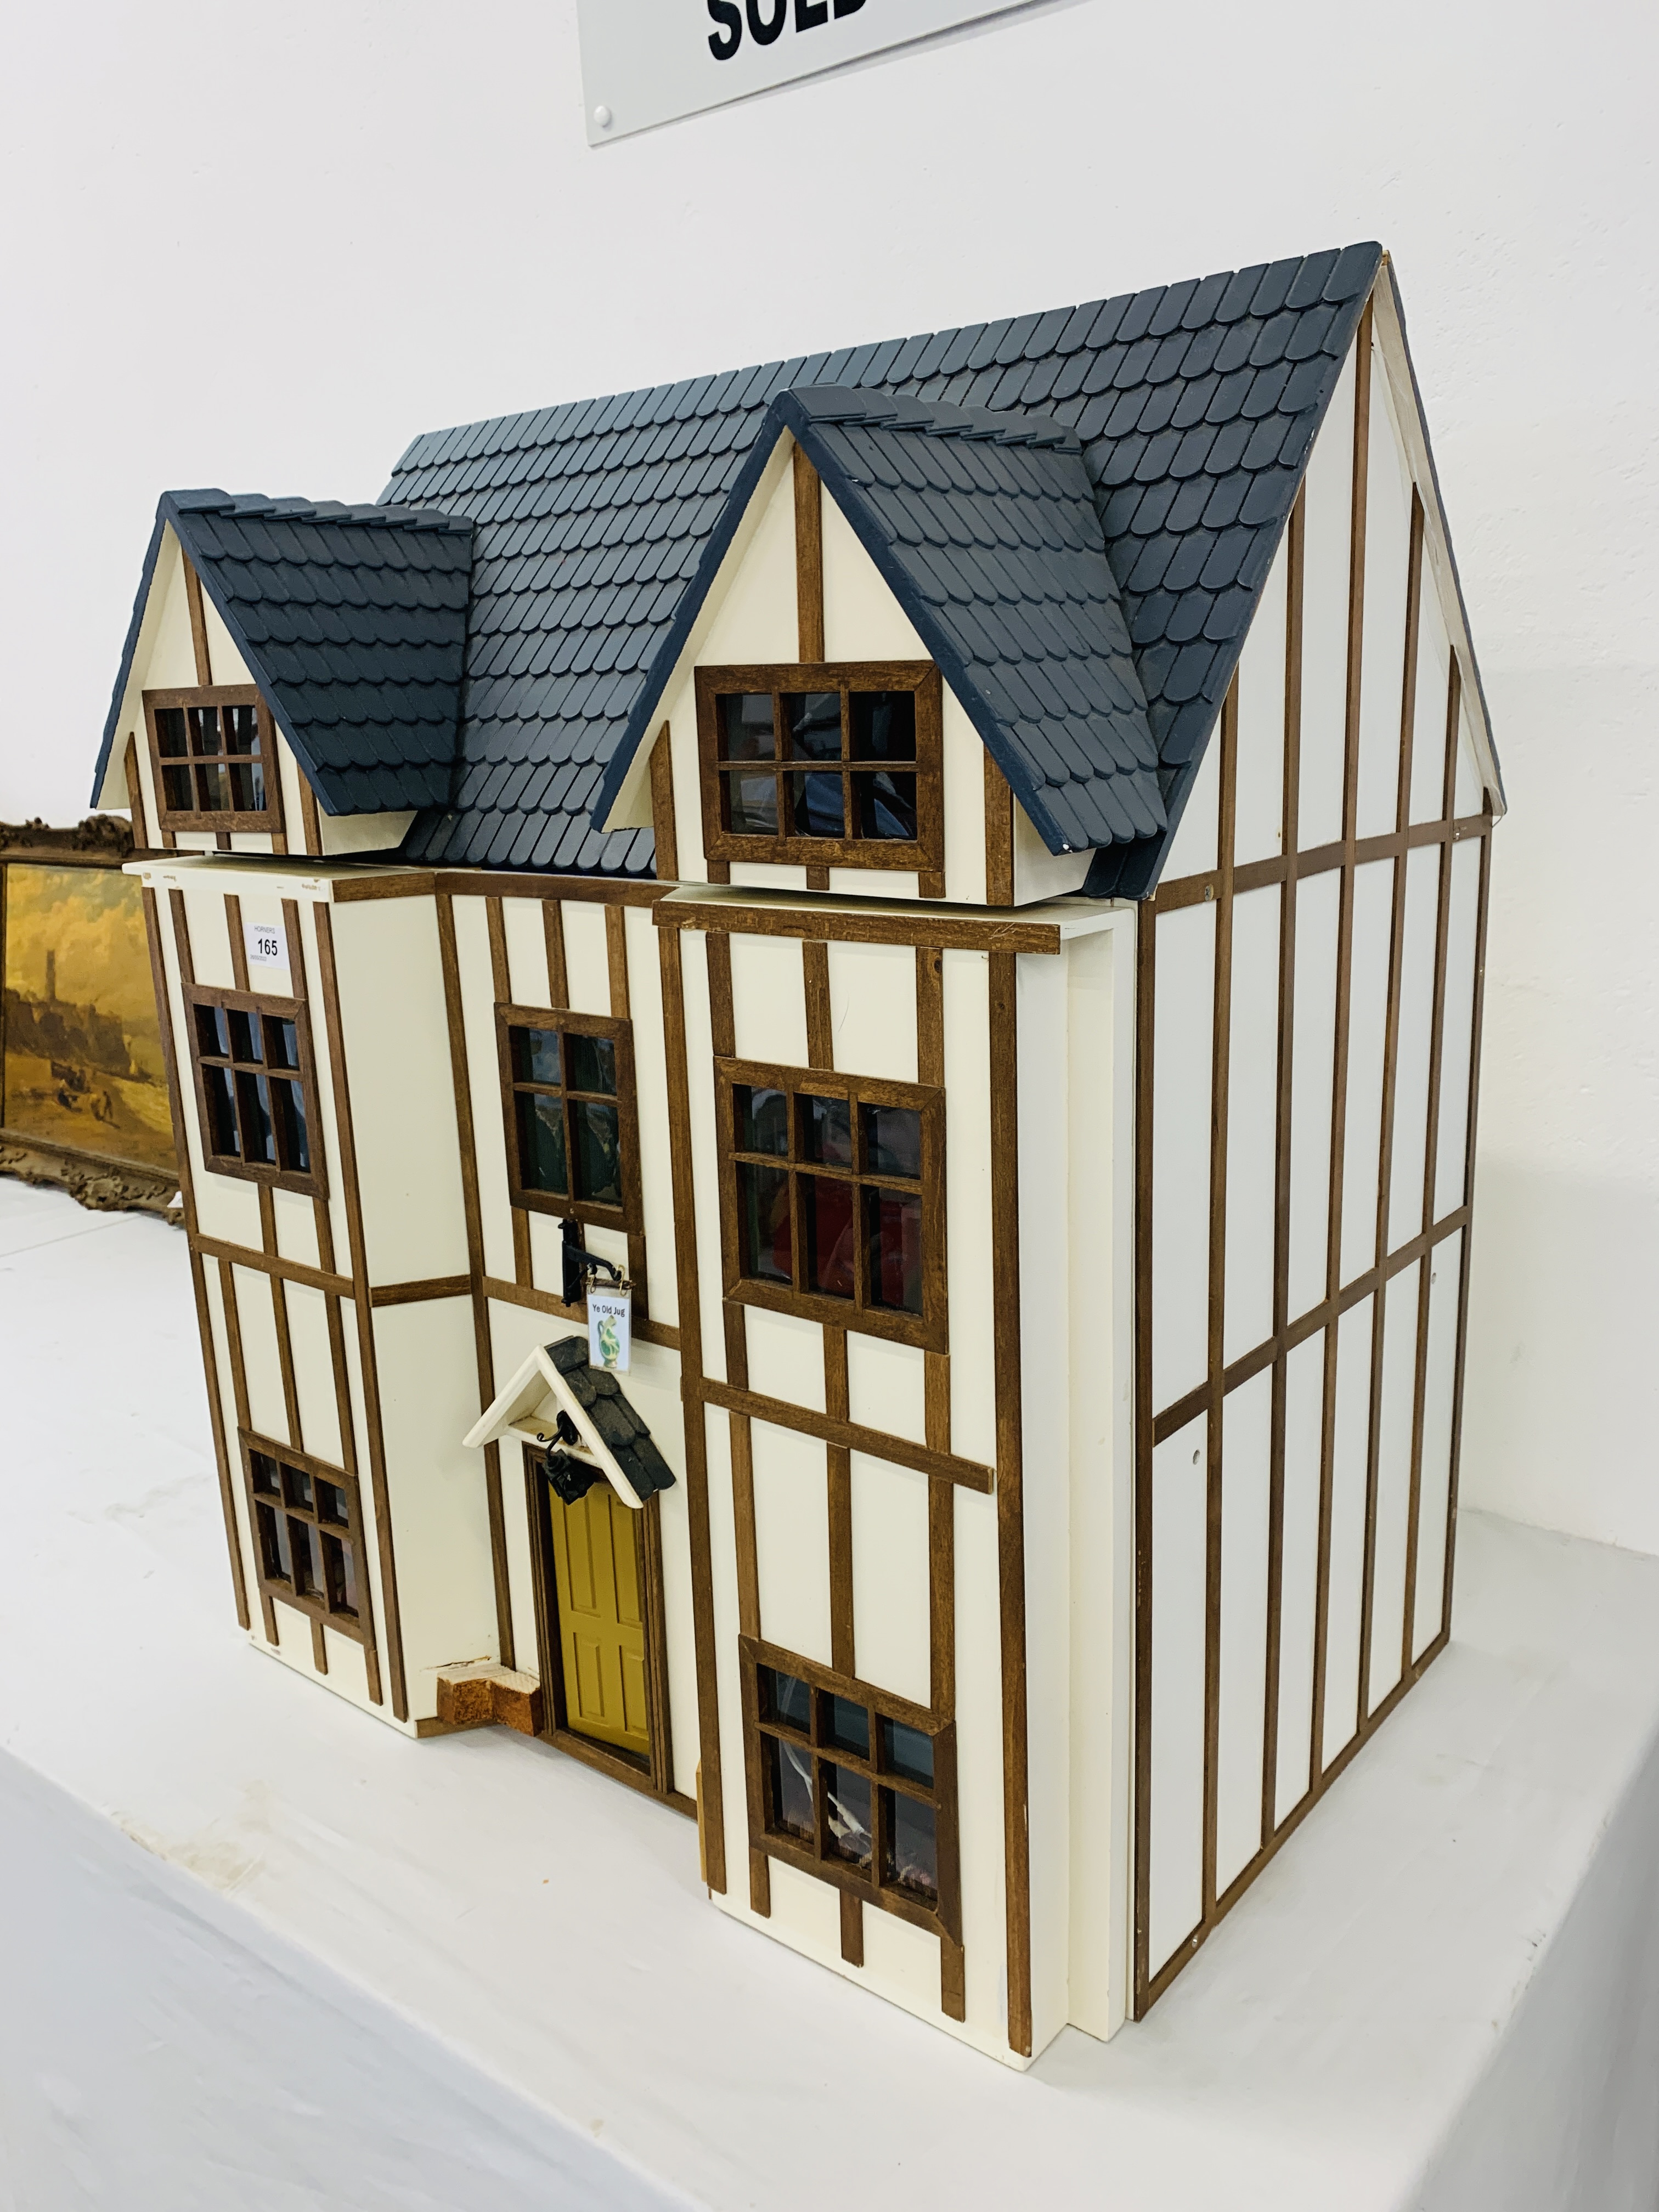 THREE STOREY DOLLS HOUSE ALONG WITH VARIOUS MINIATURE DOLLS HOUSE FURNITURE H 69CM, W 59CM, D 42CM. - Image 2 of 12